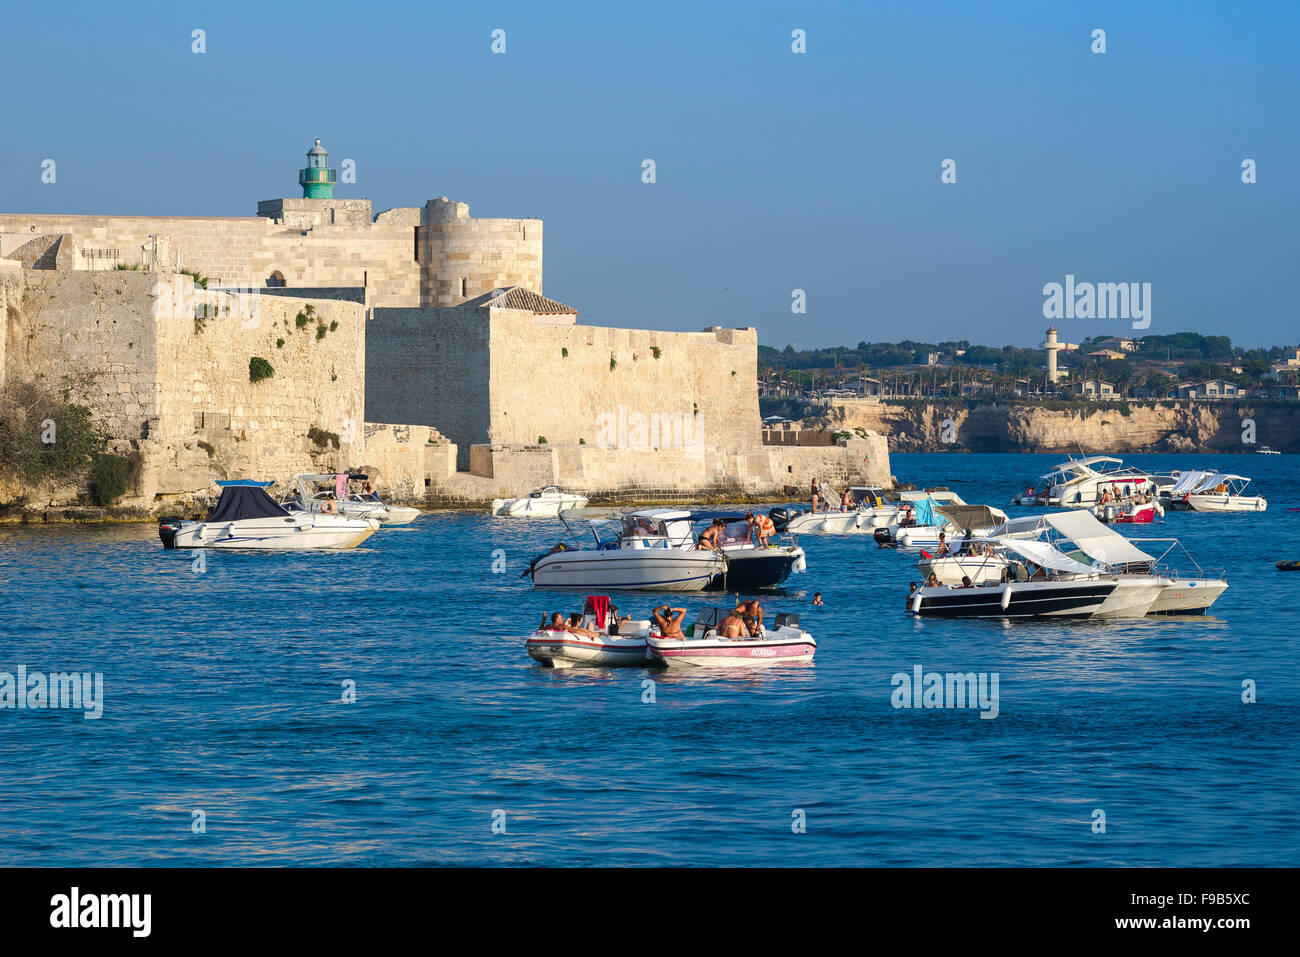 Ortigia harbor Sicily, view of Sicilians relaxing on their leisure boats in Ortigia harbour, Syracuse (Siracusa) Sicily. Stock Photo